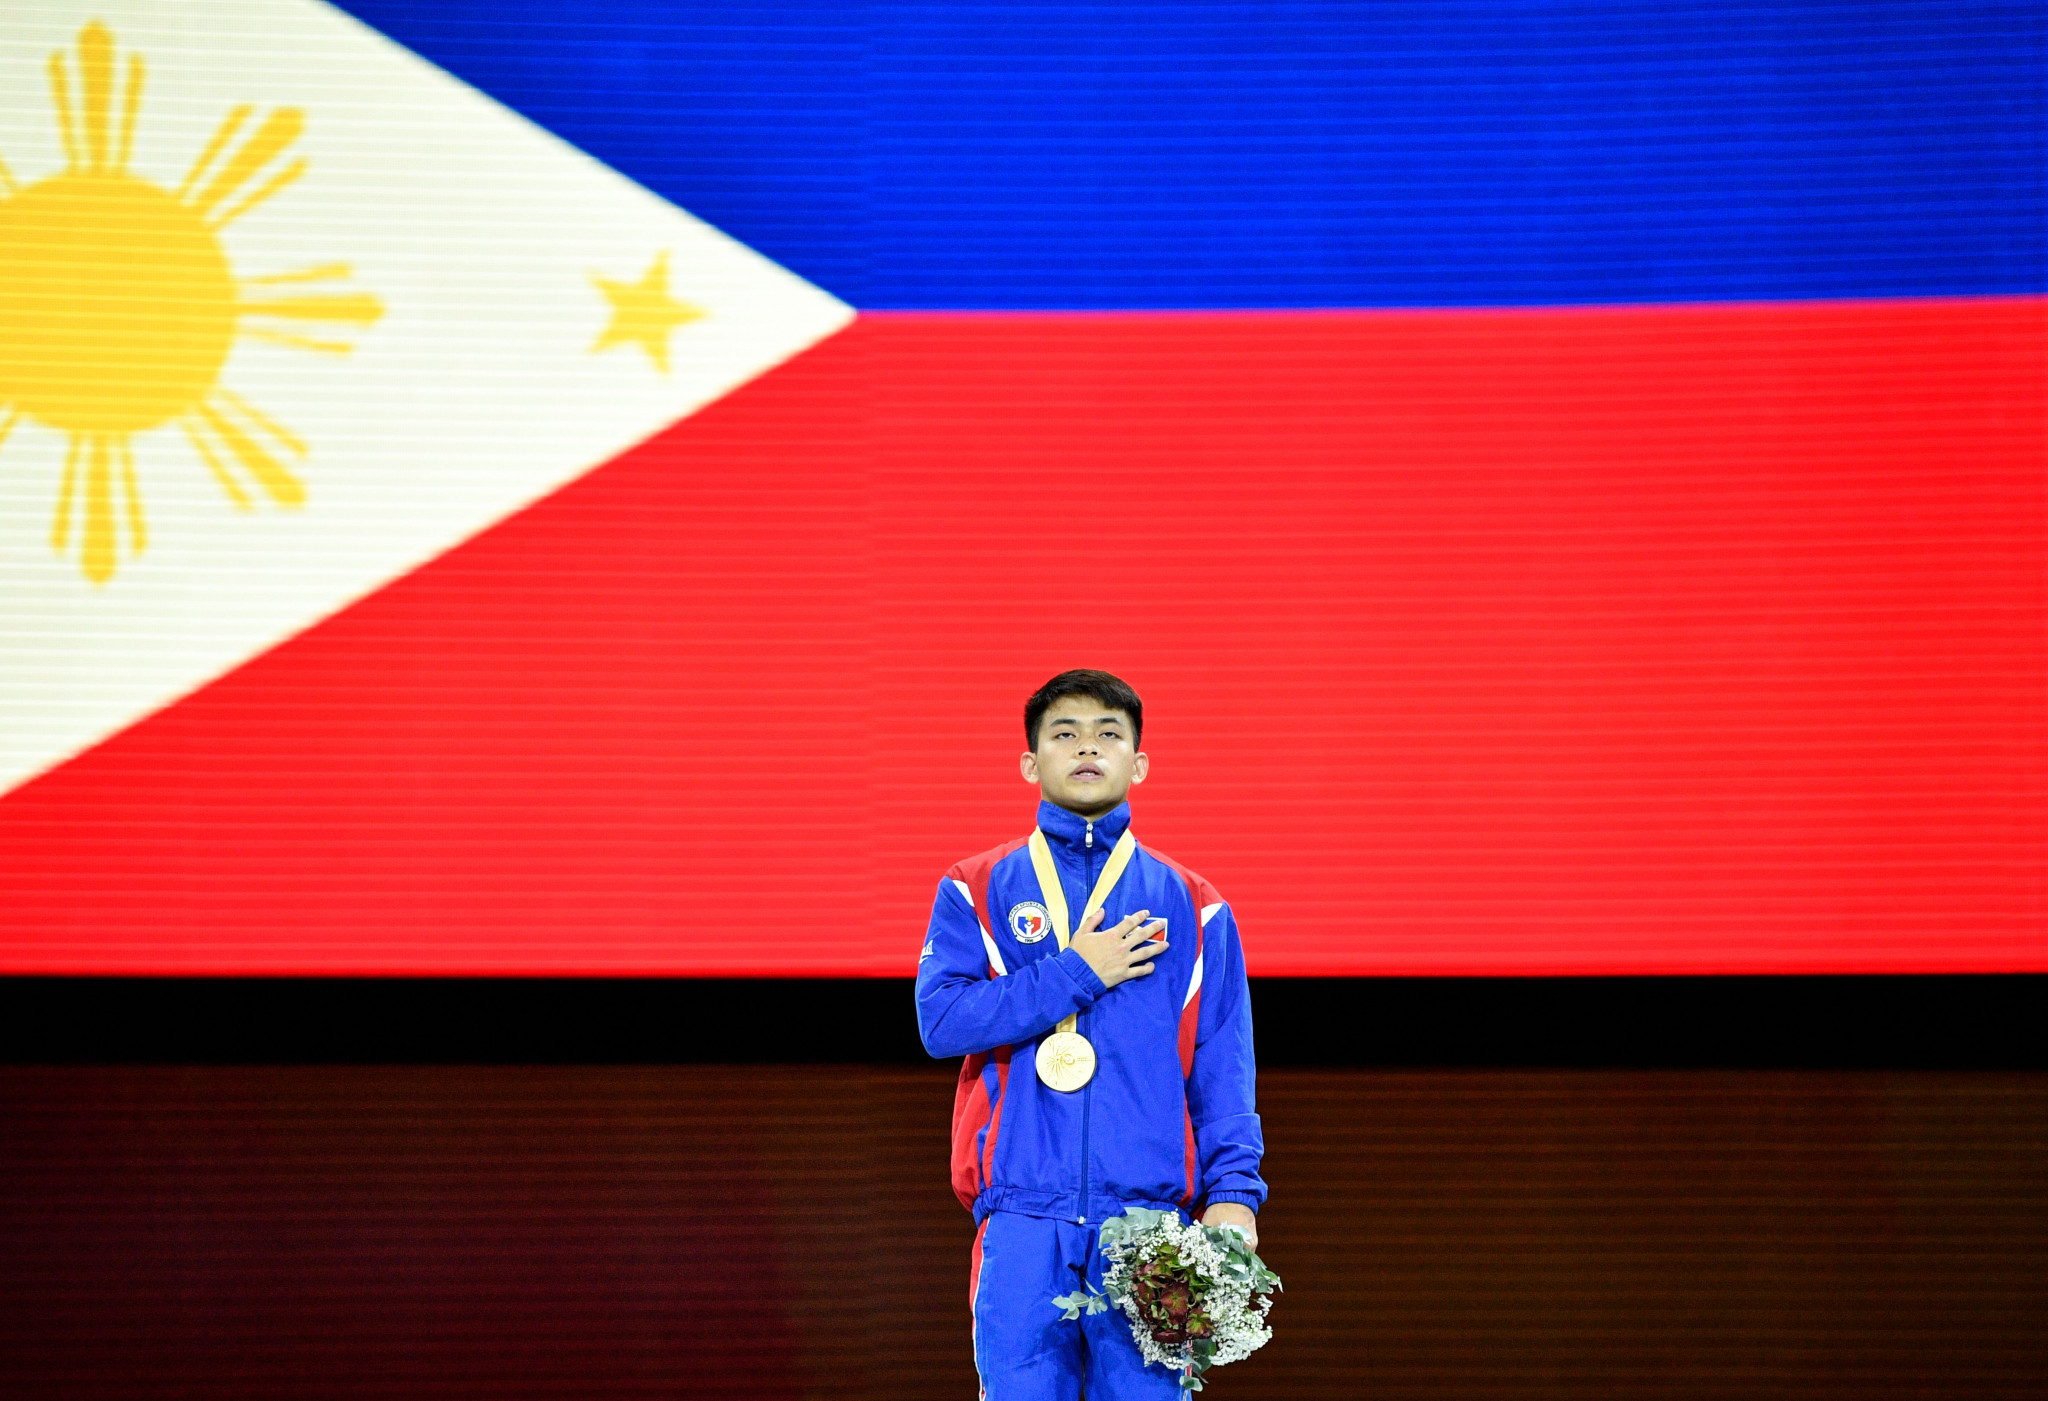 World gymnastics champion Carlos Yulo is a medal hope for Tokyo 2020 ©Getty Images